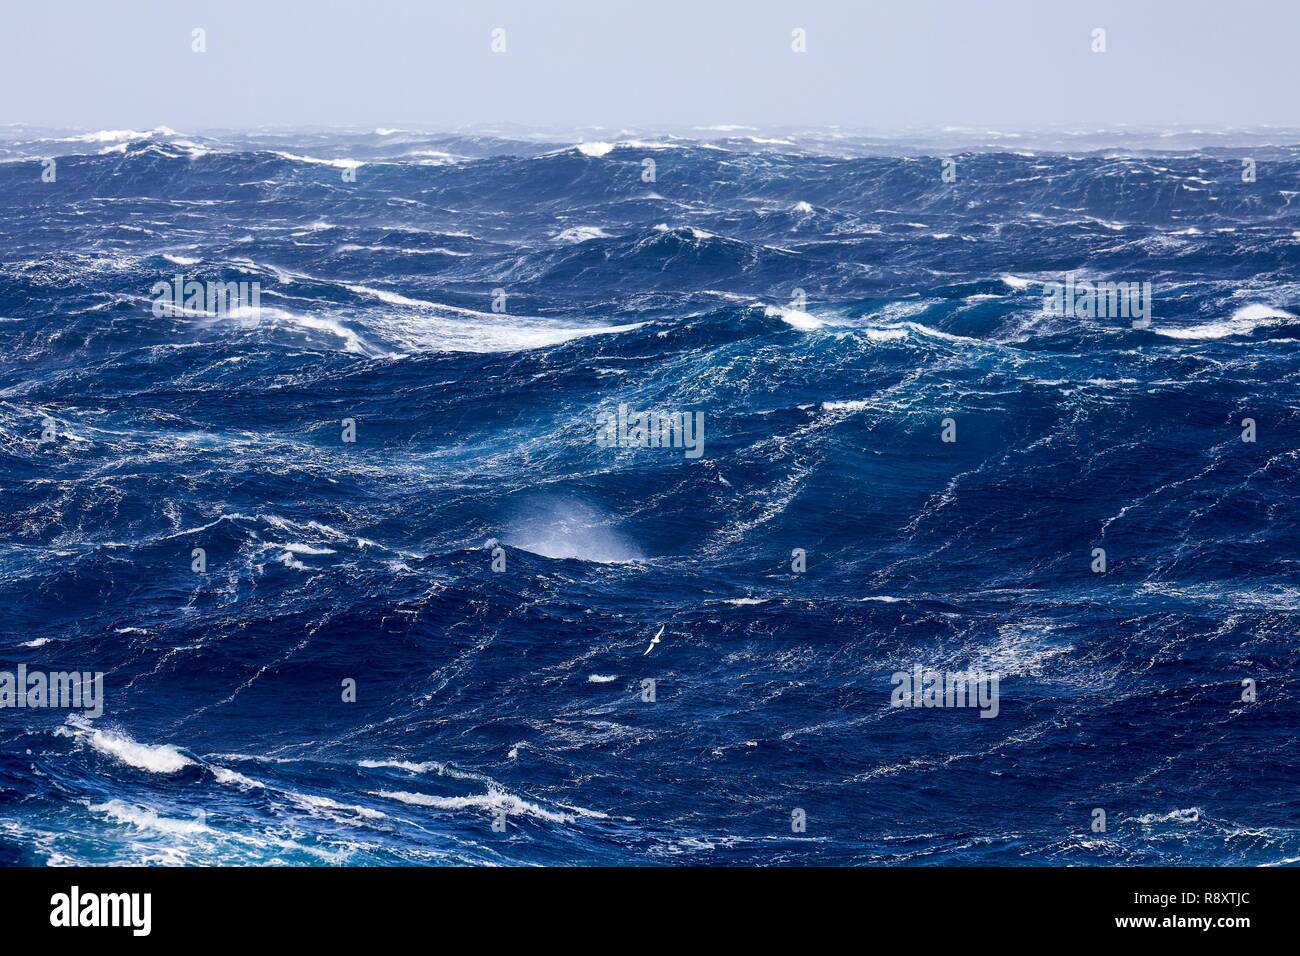 France, Indian Ocean, French Southern and Antarctic Lands, violent storm, Beaufort scale 10 gusting to 11 in the roaring forties, picture taken aboard the Marion Dufresne (supply ship of French Southern and Antarctic Territories) underway from Crozet Islands to Kerguelen Islands Stock Photo